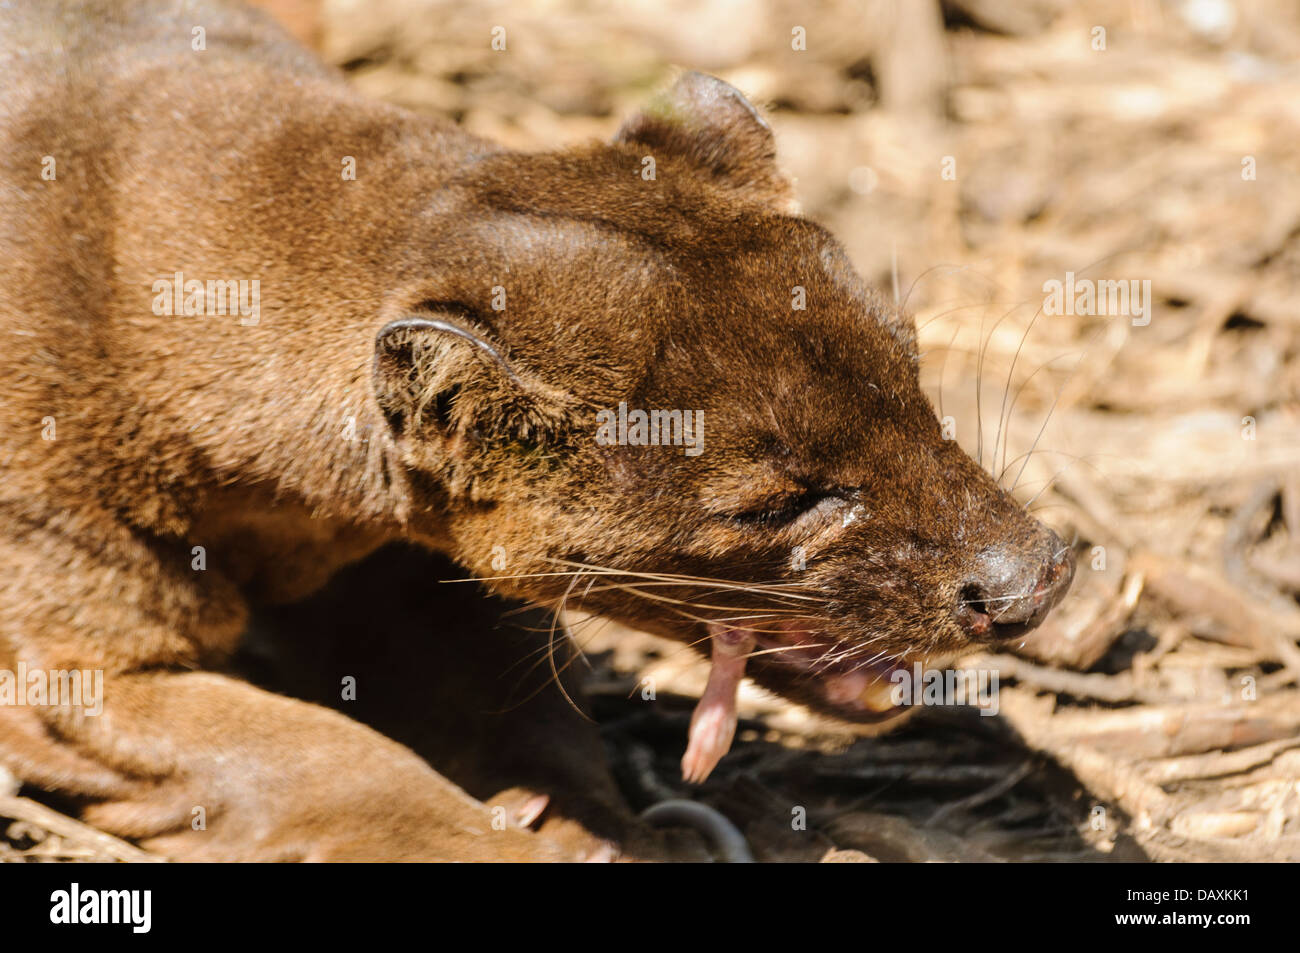 Malagasy fossa (Cryptoprocta ferox), a member of the mongoose family indiginous to Madagascar, eating a small mammal Stock Photo